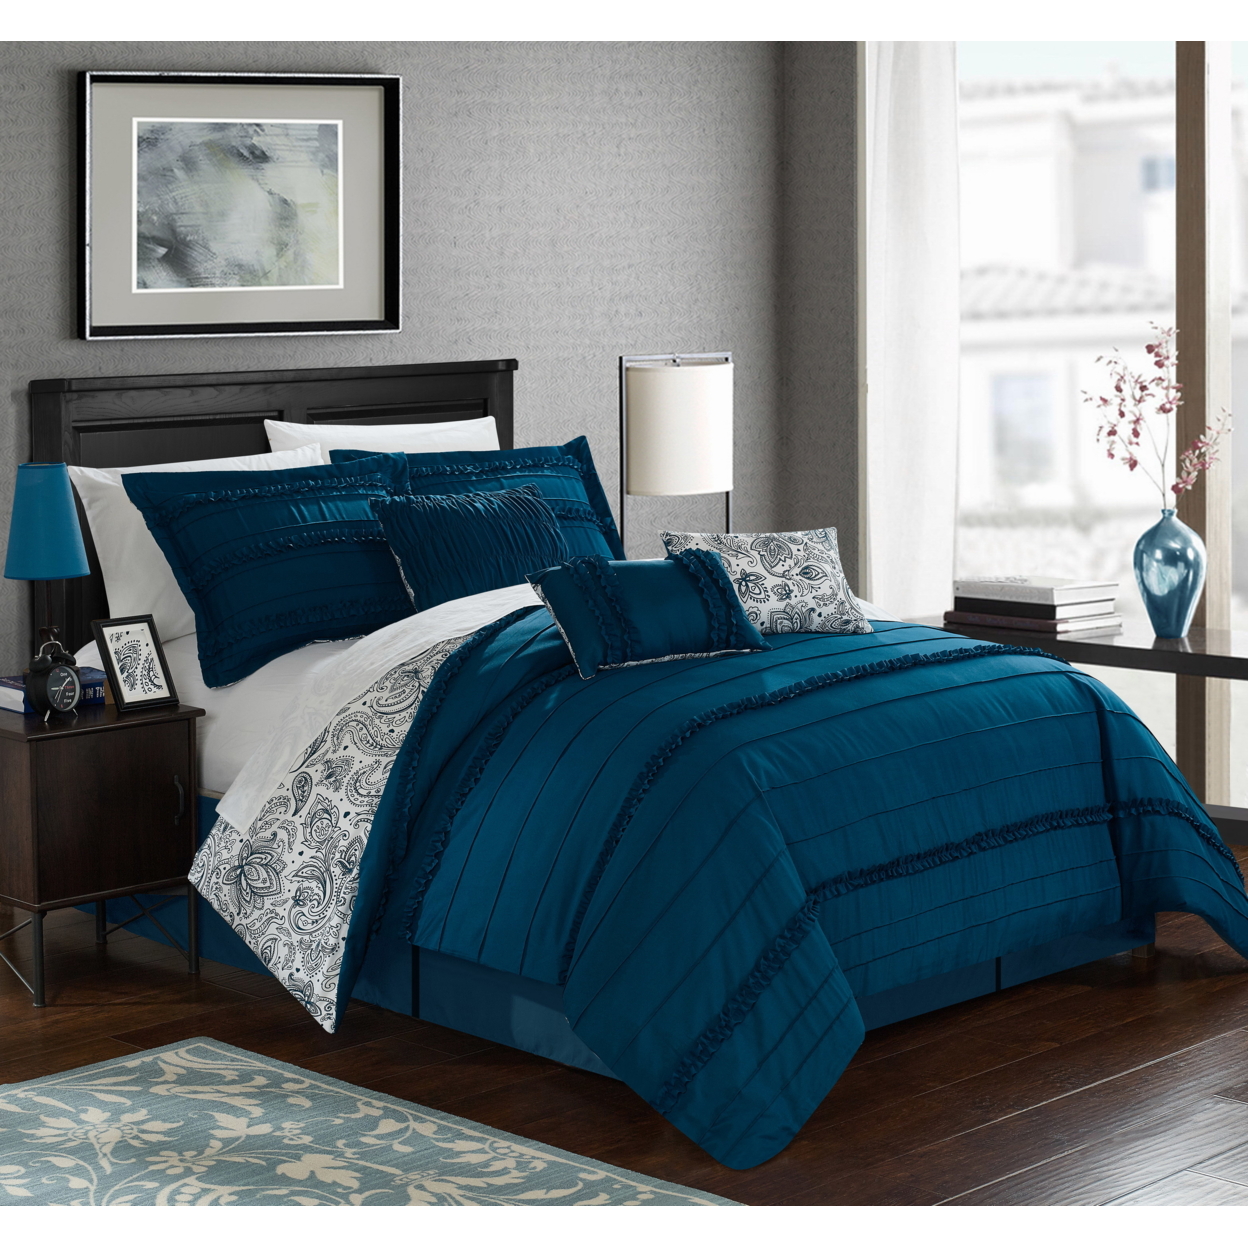 6/7 Piece Thess Pleated And Ruffled REVERSIBLE Paisely FLoral Print Comforter Set Shams And Decorative Pillows Included - Navy, Queen